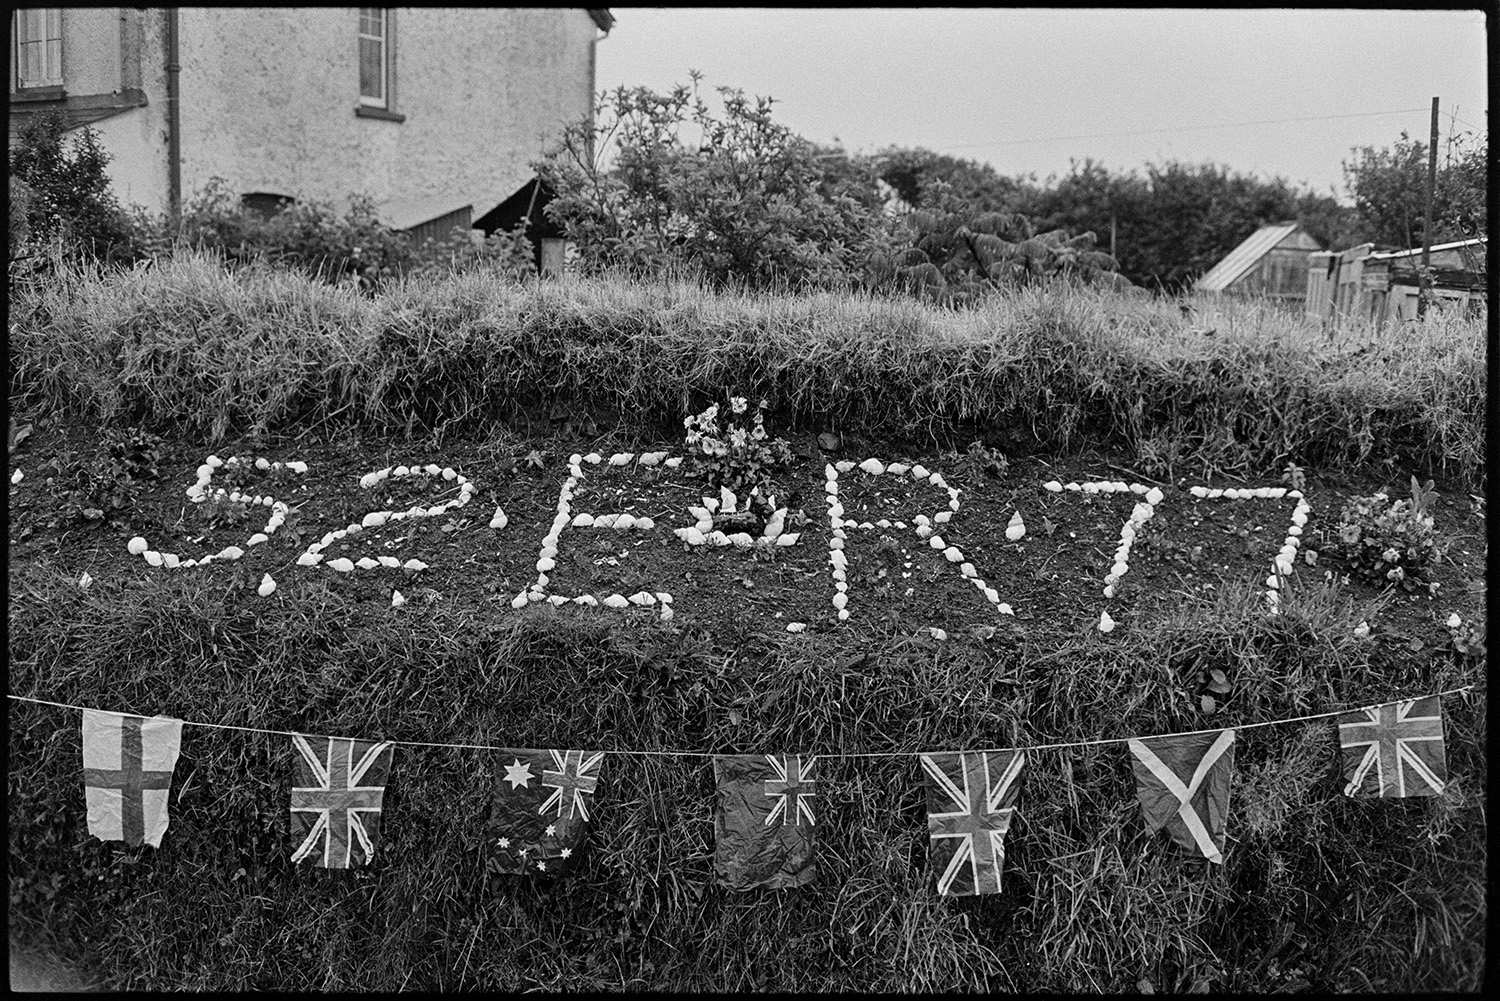 Shell pattern and flags in garden decorated for Jubilee.
[A decorative pattern in a garden near Hartland celebrating the Silver Jubilee of Queen Elizabeth II with shells, flowers and a row of flags. The shells read '52 ER 77'. A house and garden can be seen in the background.]